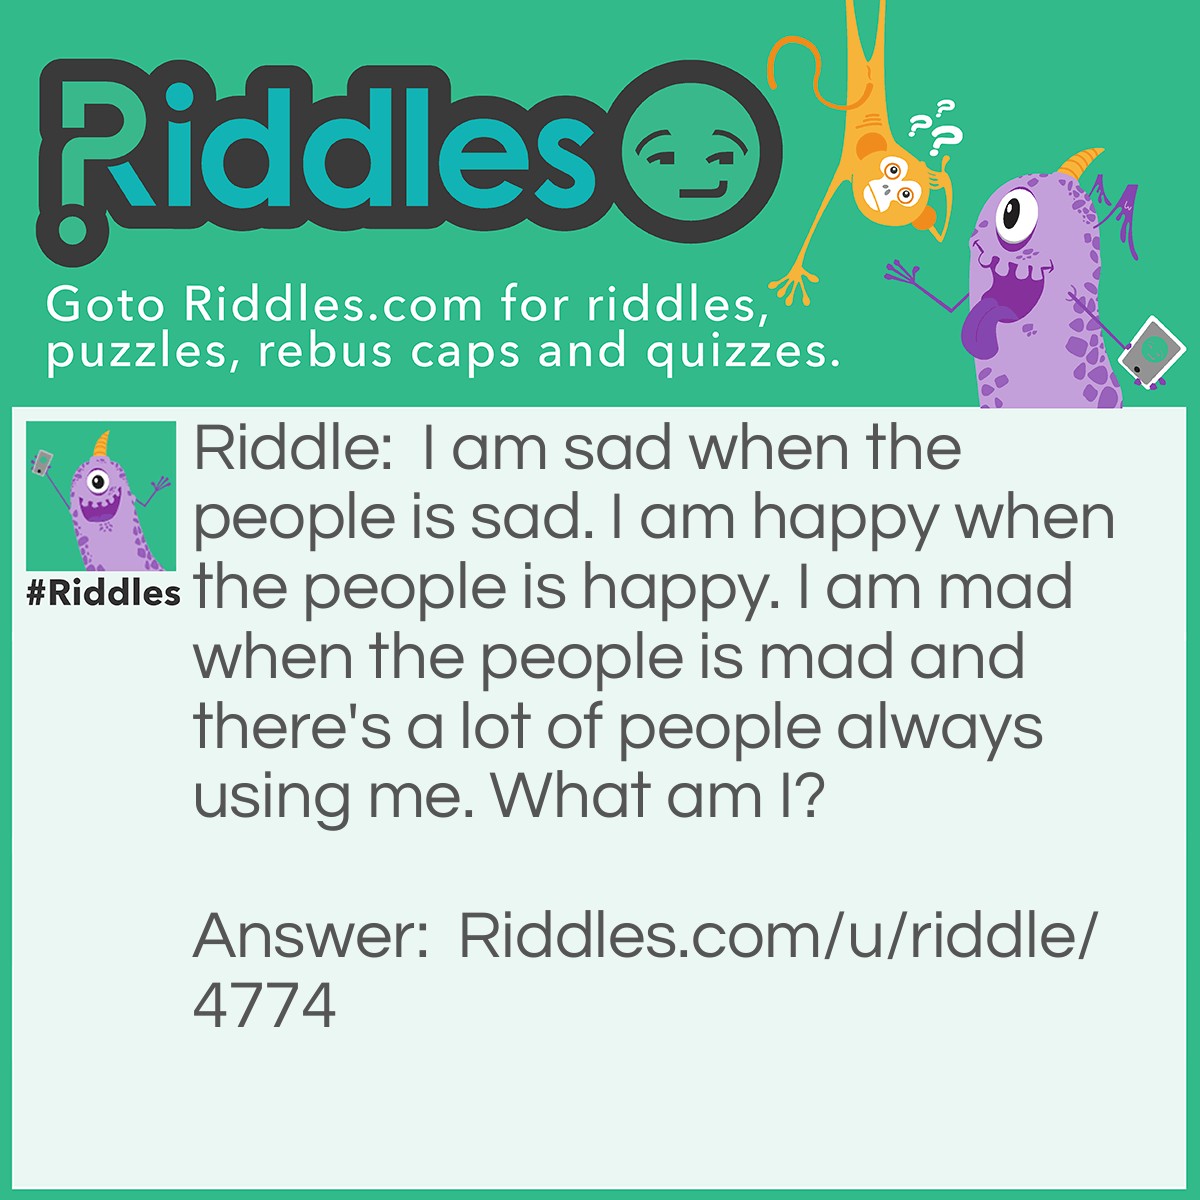 Riddle: I am sad when the people is sad. I am happy when the people is happy. I am mad when the people is mad and there's a lot of people always using me. What am I? Answer: An Emoji.